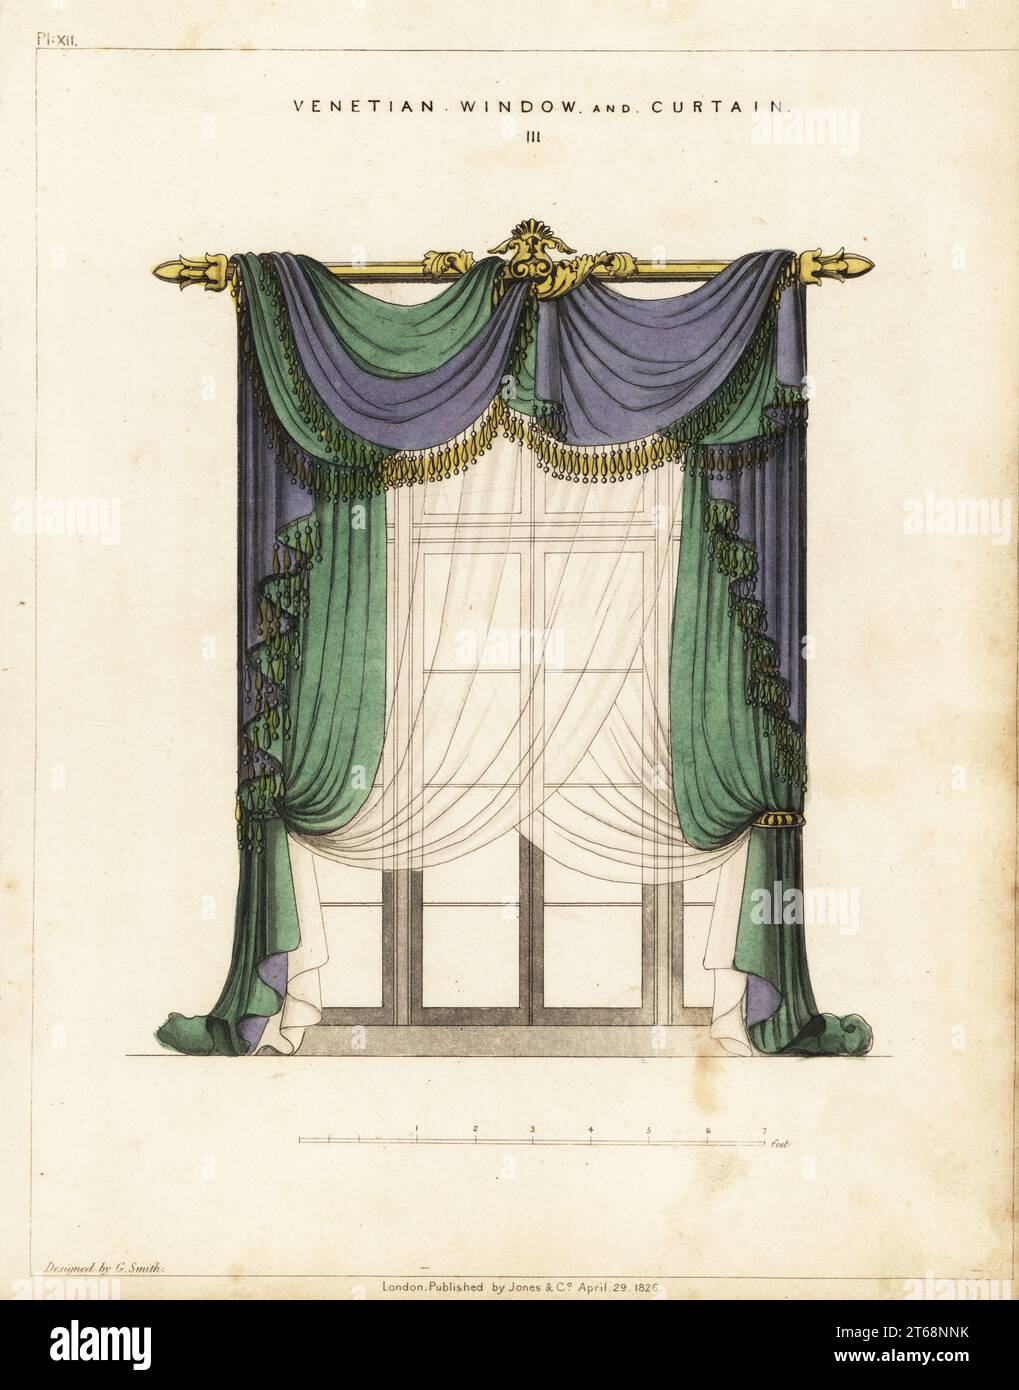 Venetian window and curtain, Regency style. Blue and green fringed curtains hanging from a gilt curtain rod with transparent curtains over the window. Handcoloured copperplate engraving from George Smiths The Cabinet-Maker and Upholsterers Guide, Jones and Co., London, 1828. George Smith was upholsterer and furniture draughtsman to his Majesty (the Prince of Wales, later King George IV), circa 1786-1826. Stock Photo